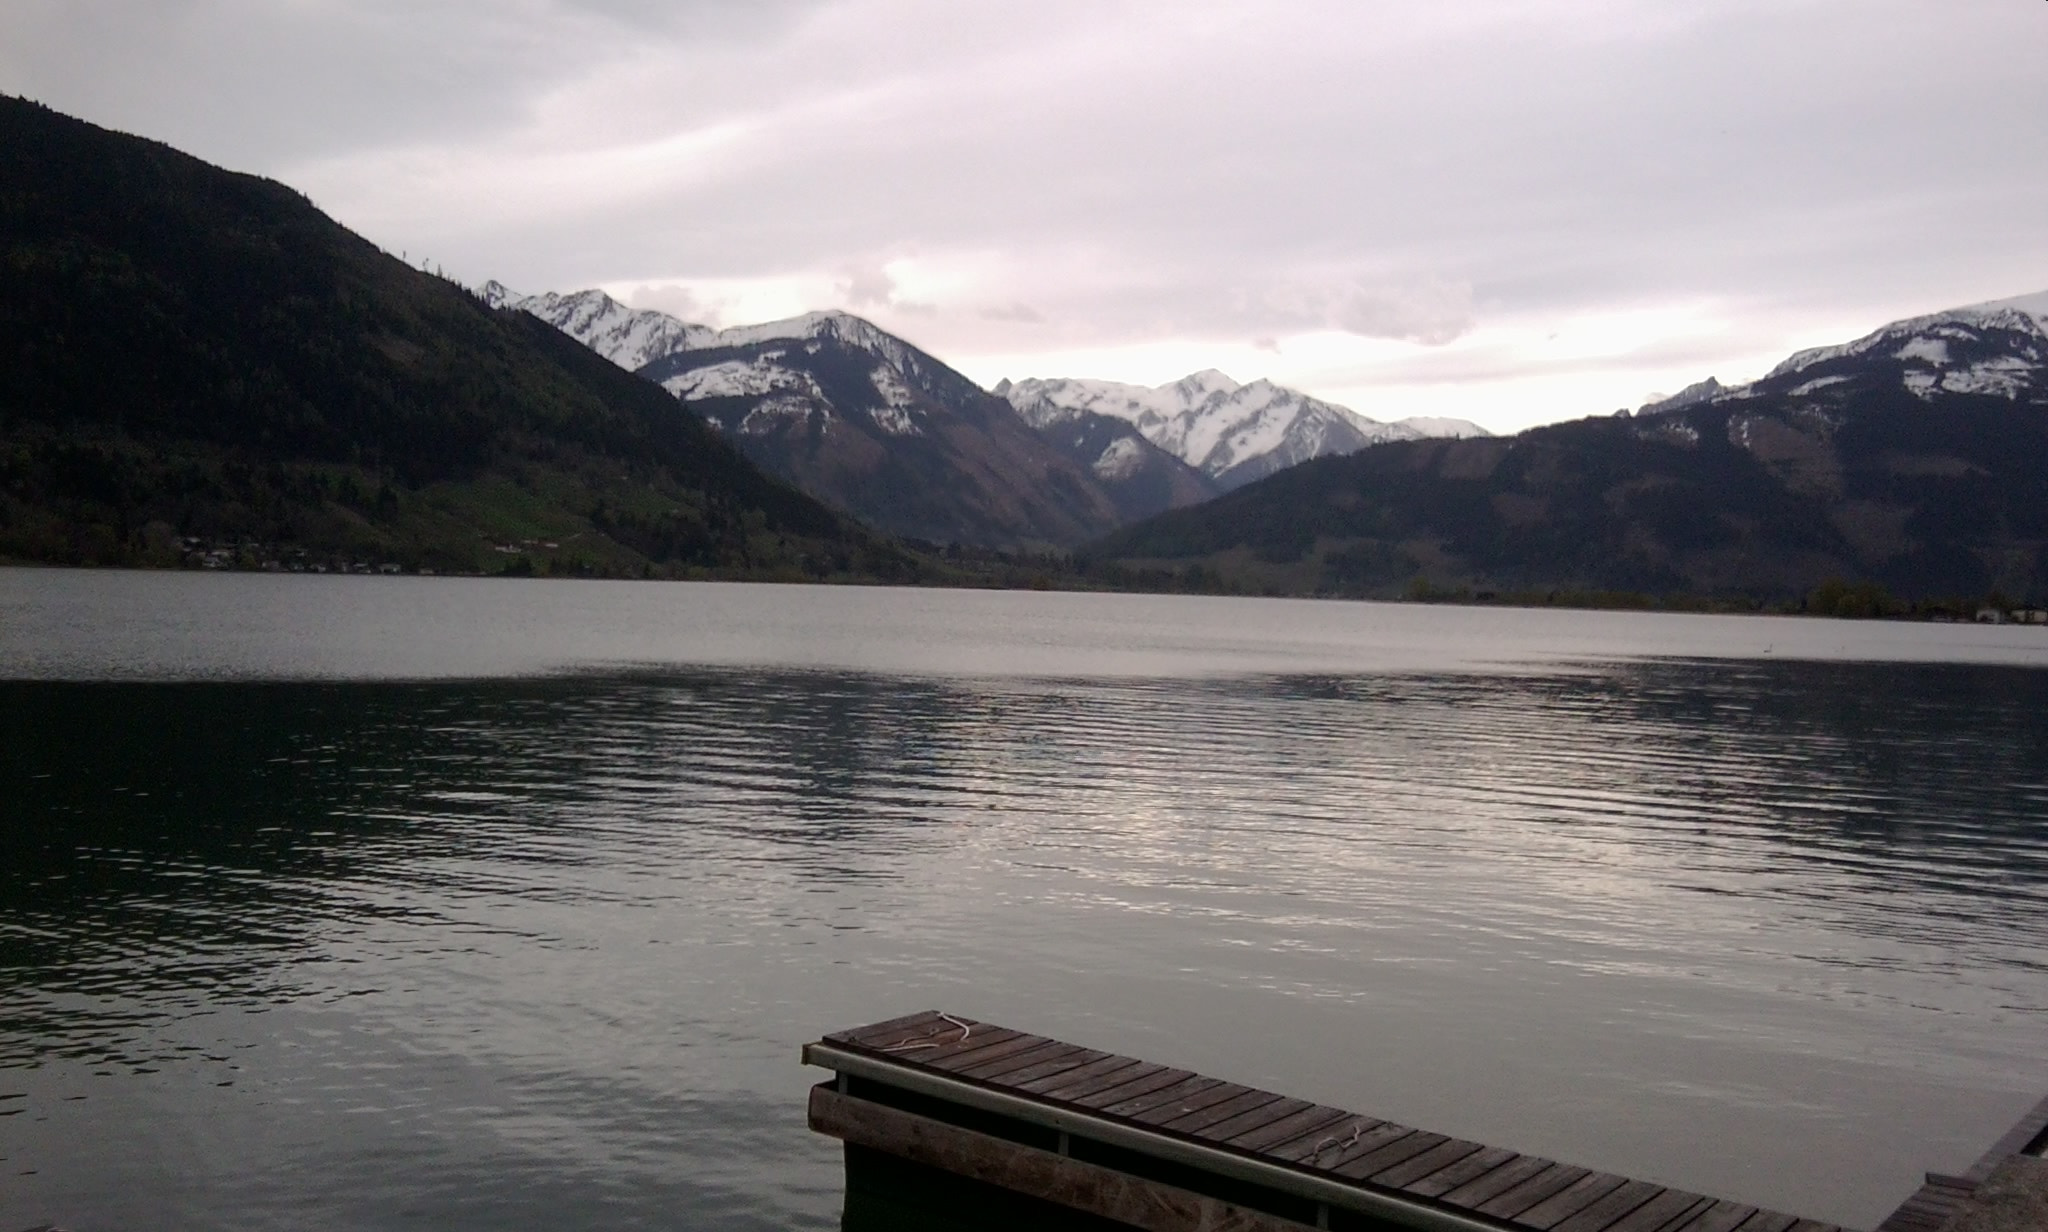 Samsung GT-S5620 sample photo. Zell am see photography